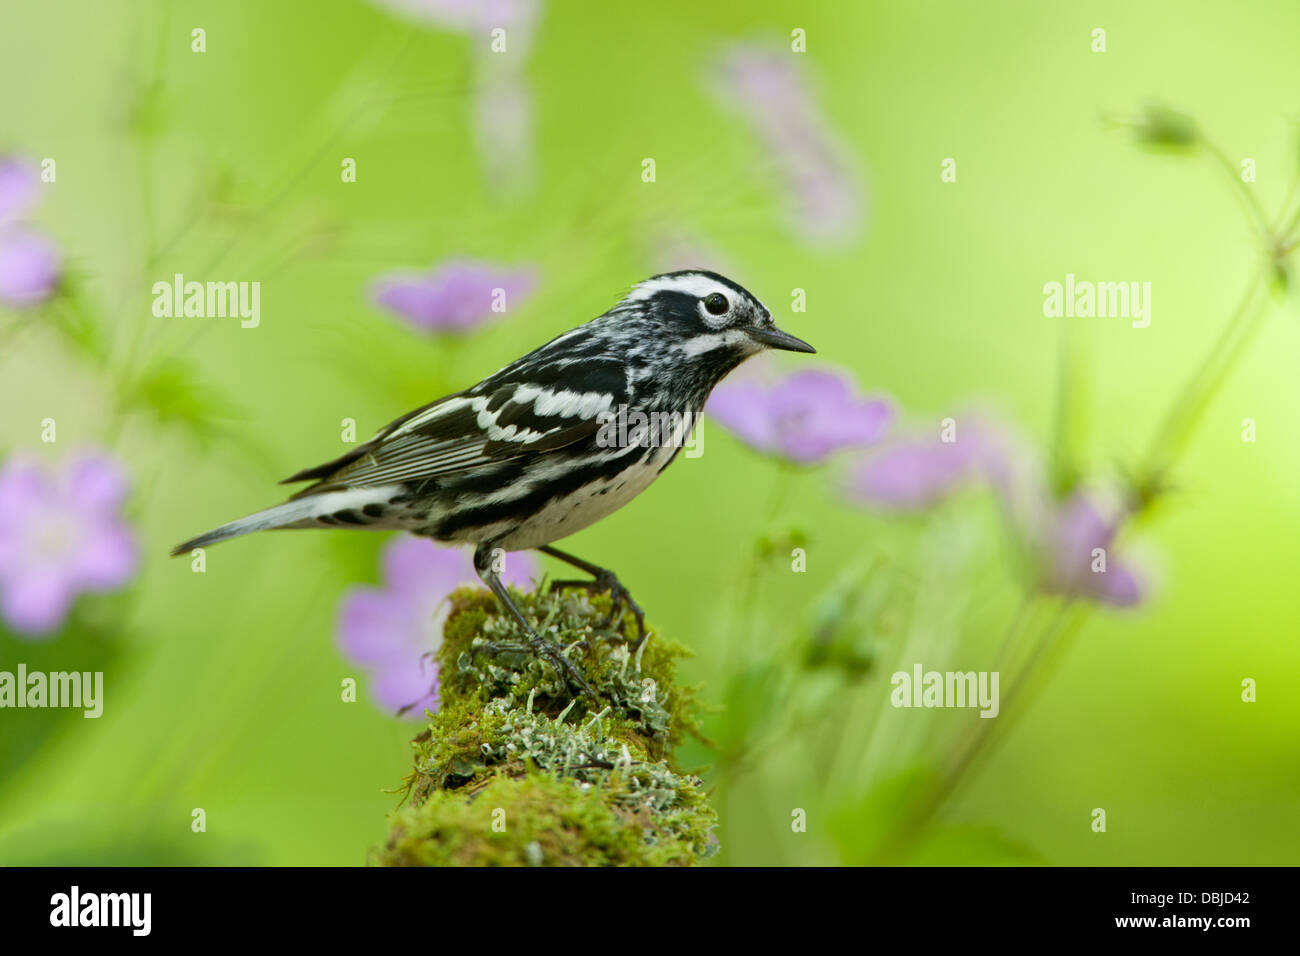 Black and White Warbler perching on Mossy Log amongst Wild Geraniums Blossoms Stock Photo